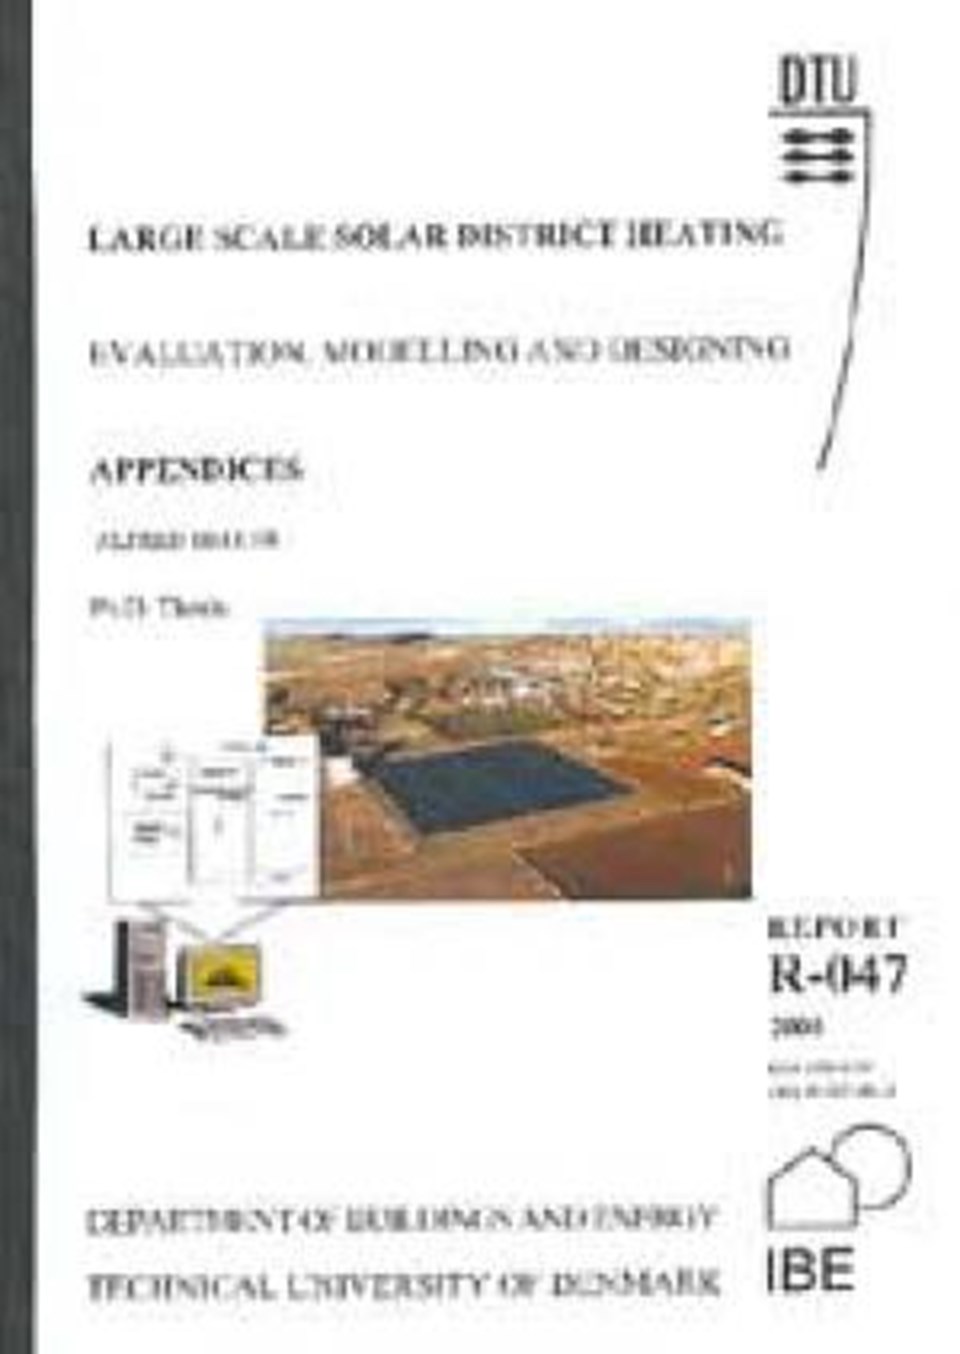 Large Scale Solar District Heating. Evaluation, Mo